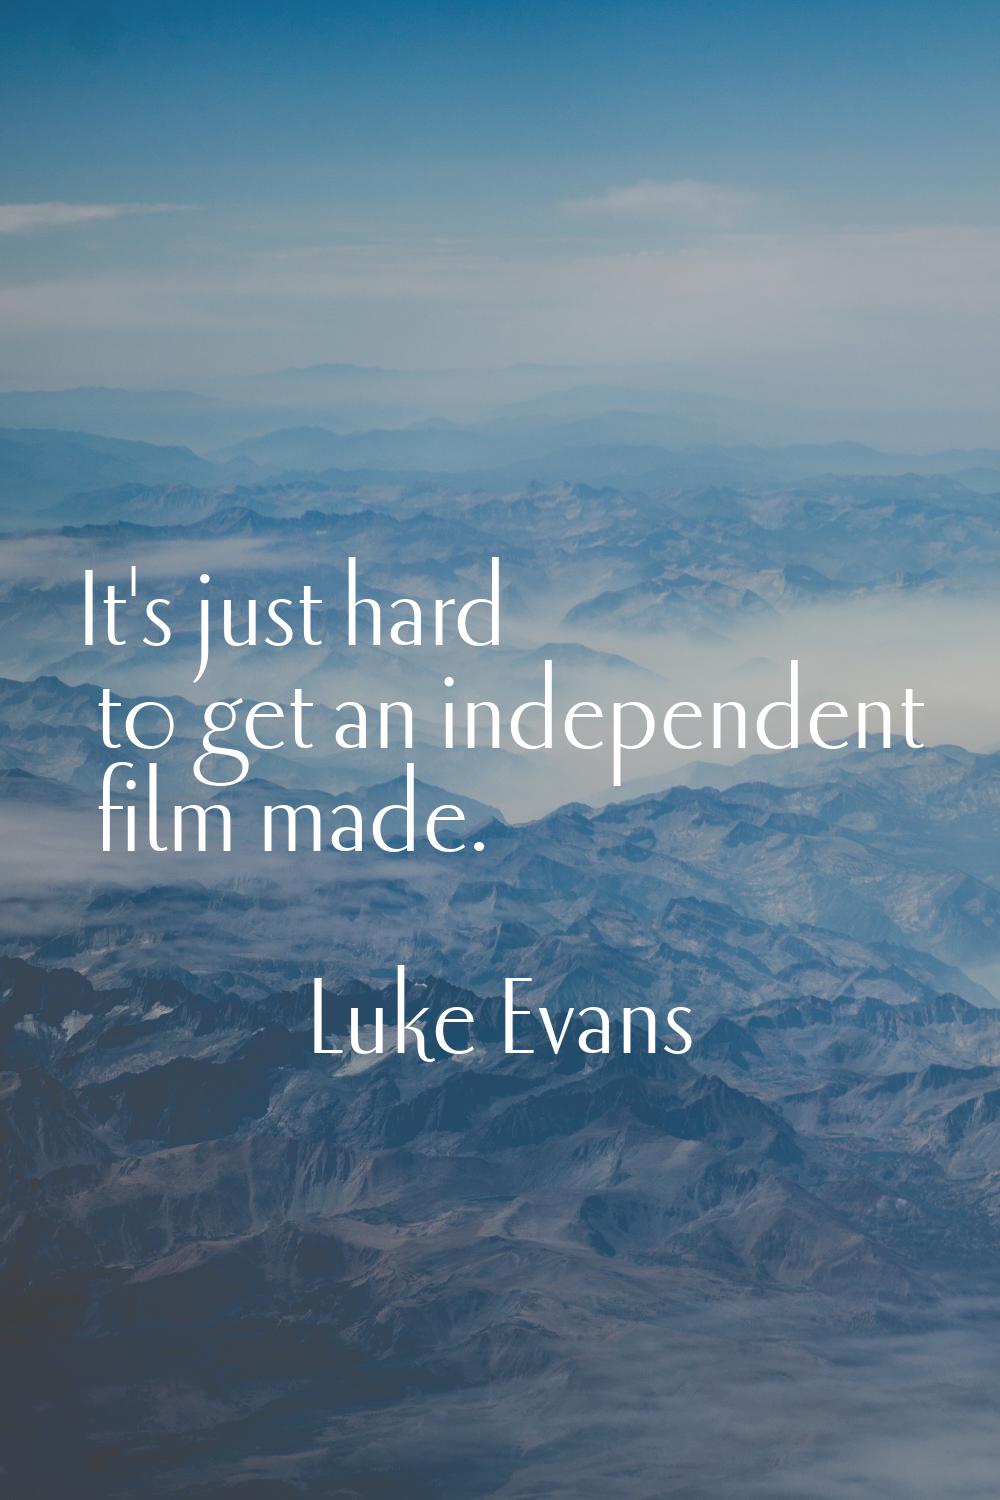 It's just hard to get an independent film made.